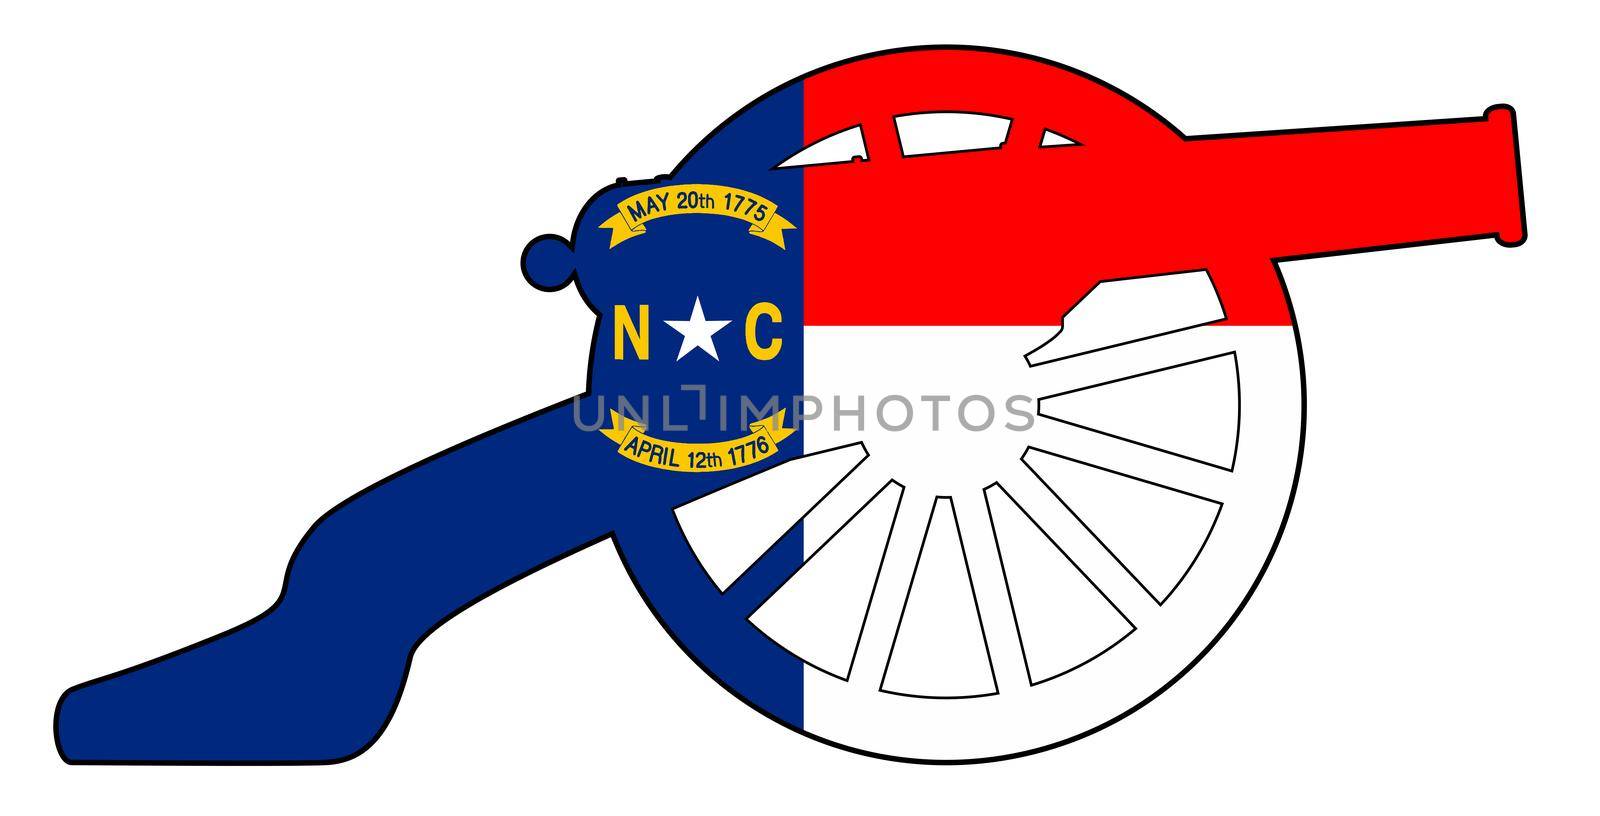 Typical American civil war cannon gun with North Carolina state flag isolated on a white background